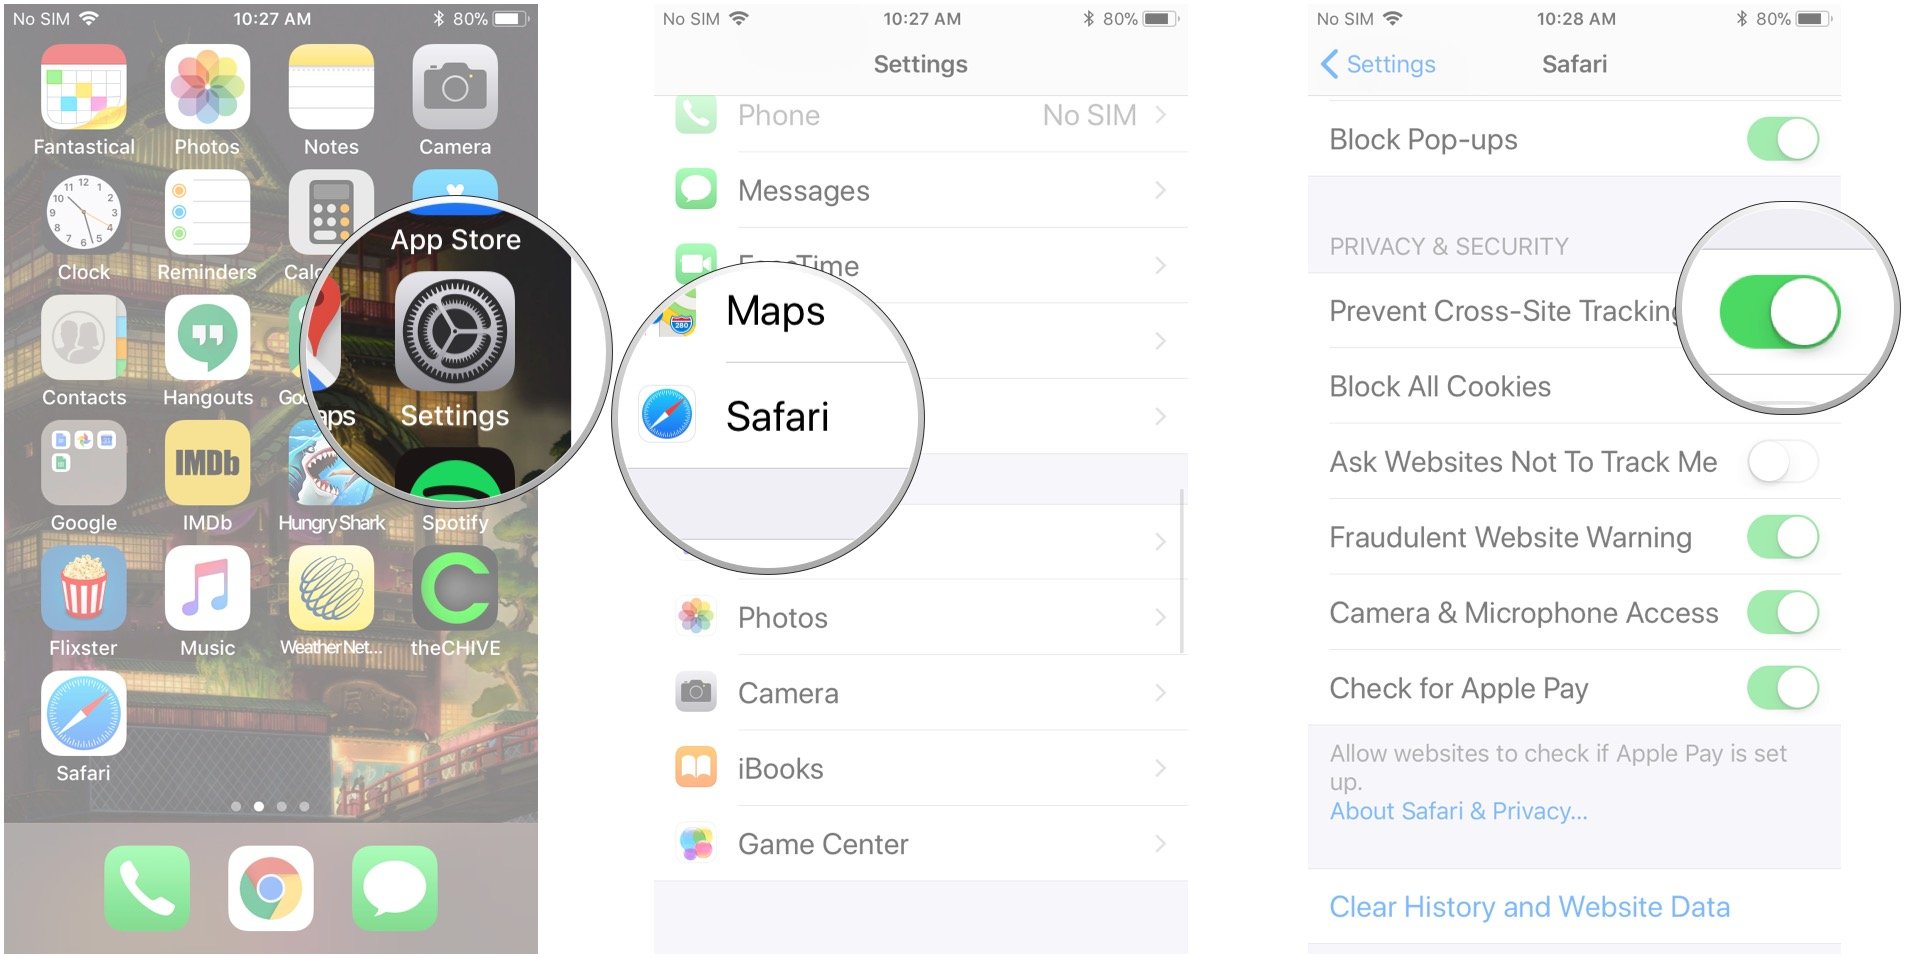 Launch Settings, tap Safari, tap the switch next to Prevent Cross-Site Tracking